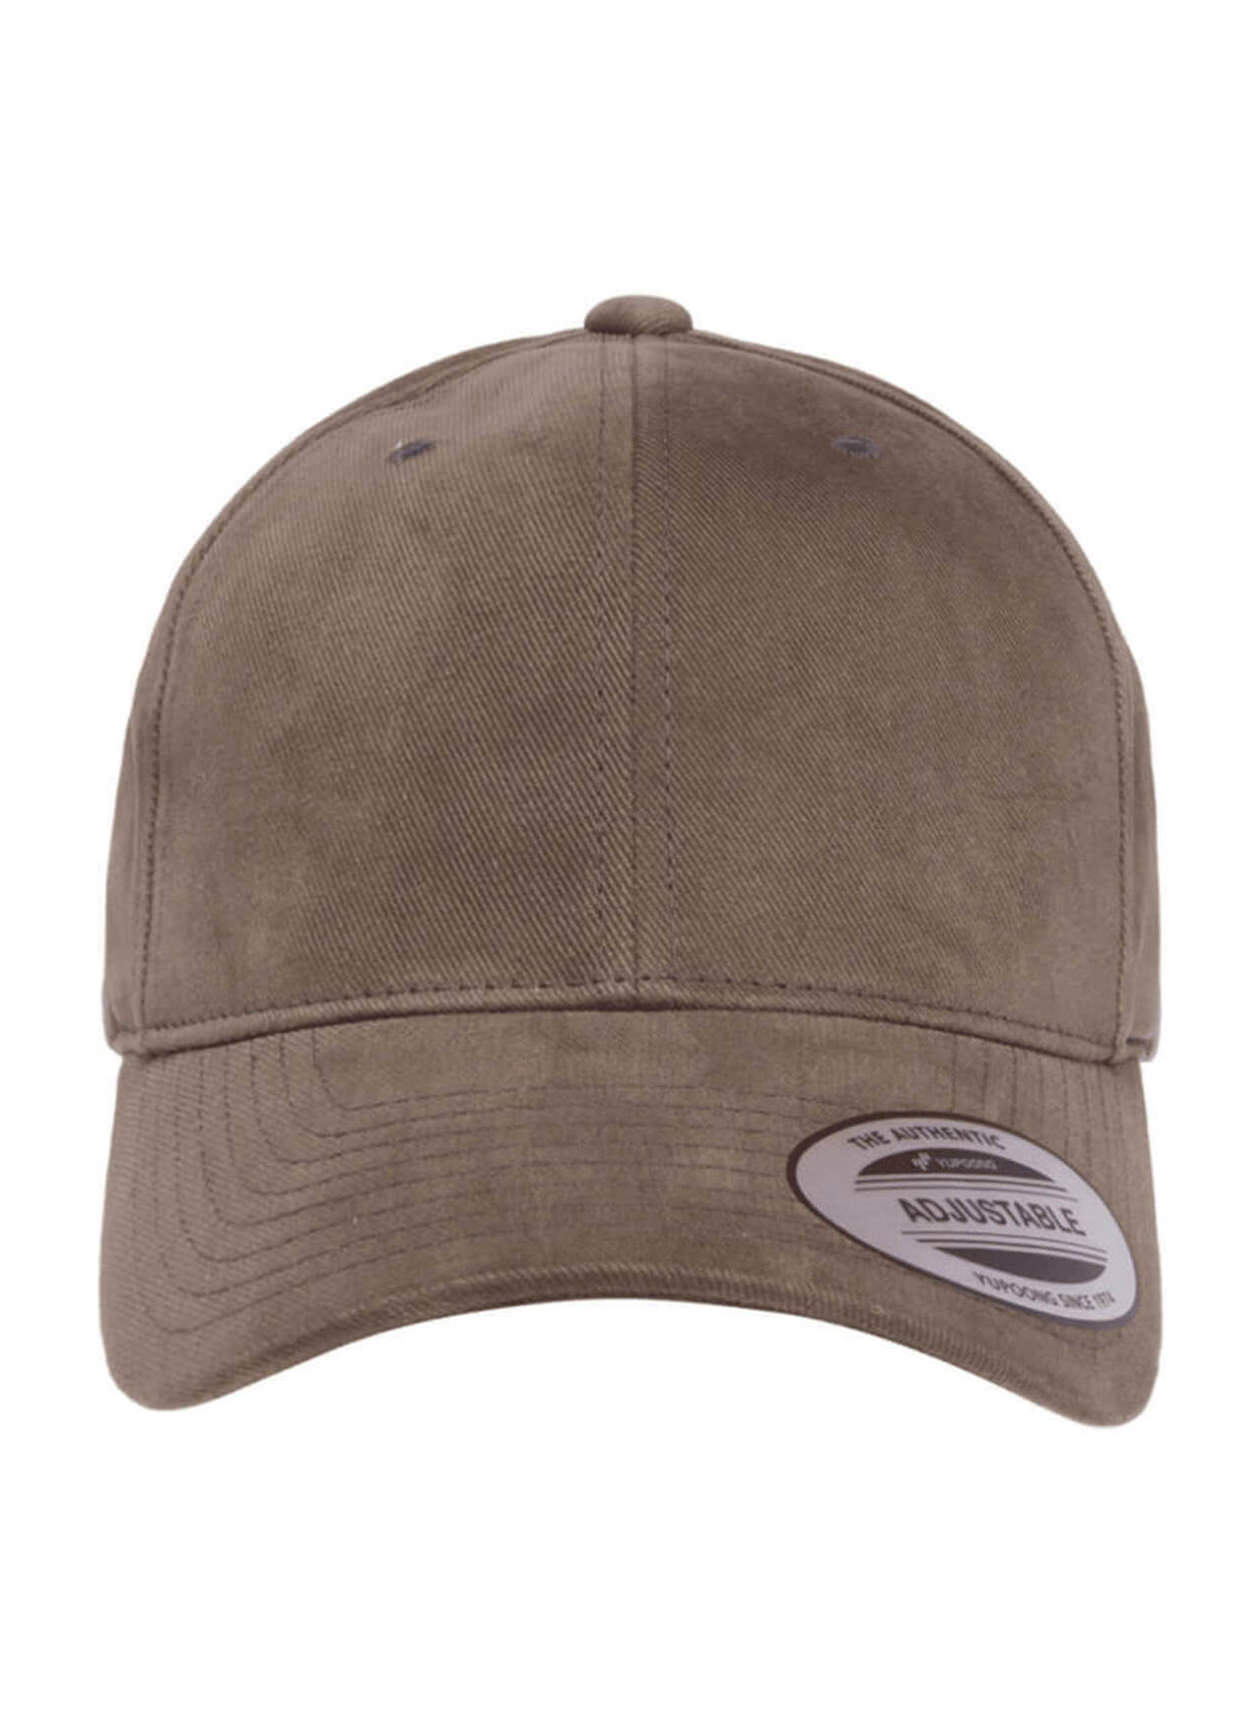 Yupoong Dark Grey Brushed Cotton Twill Mid-Profile Hat